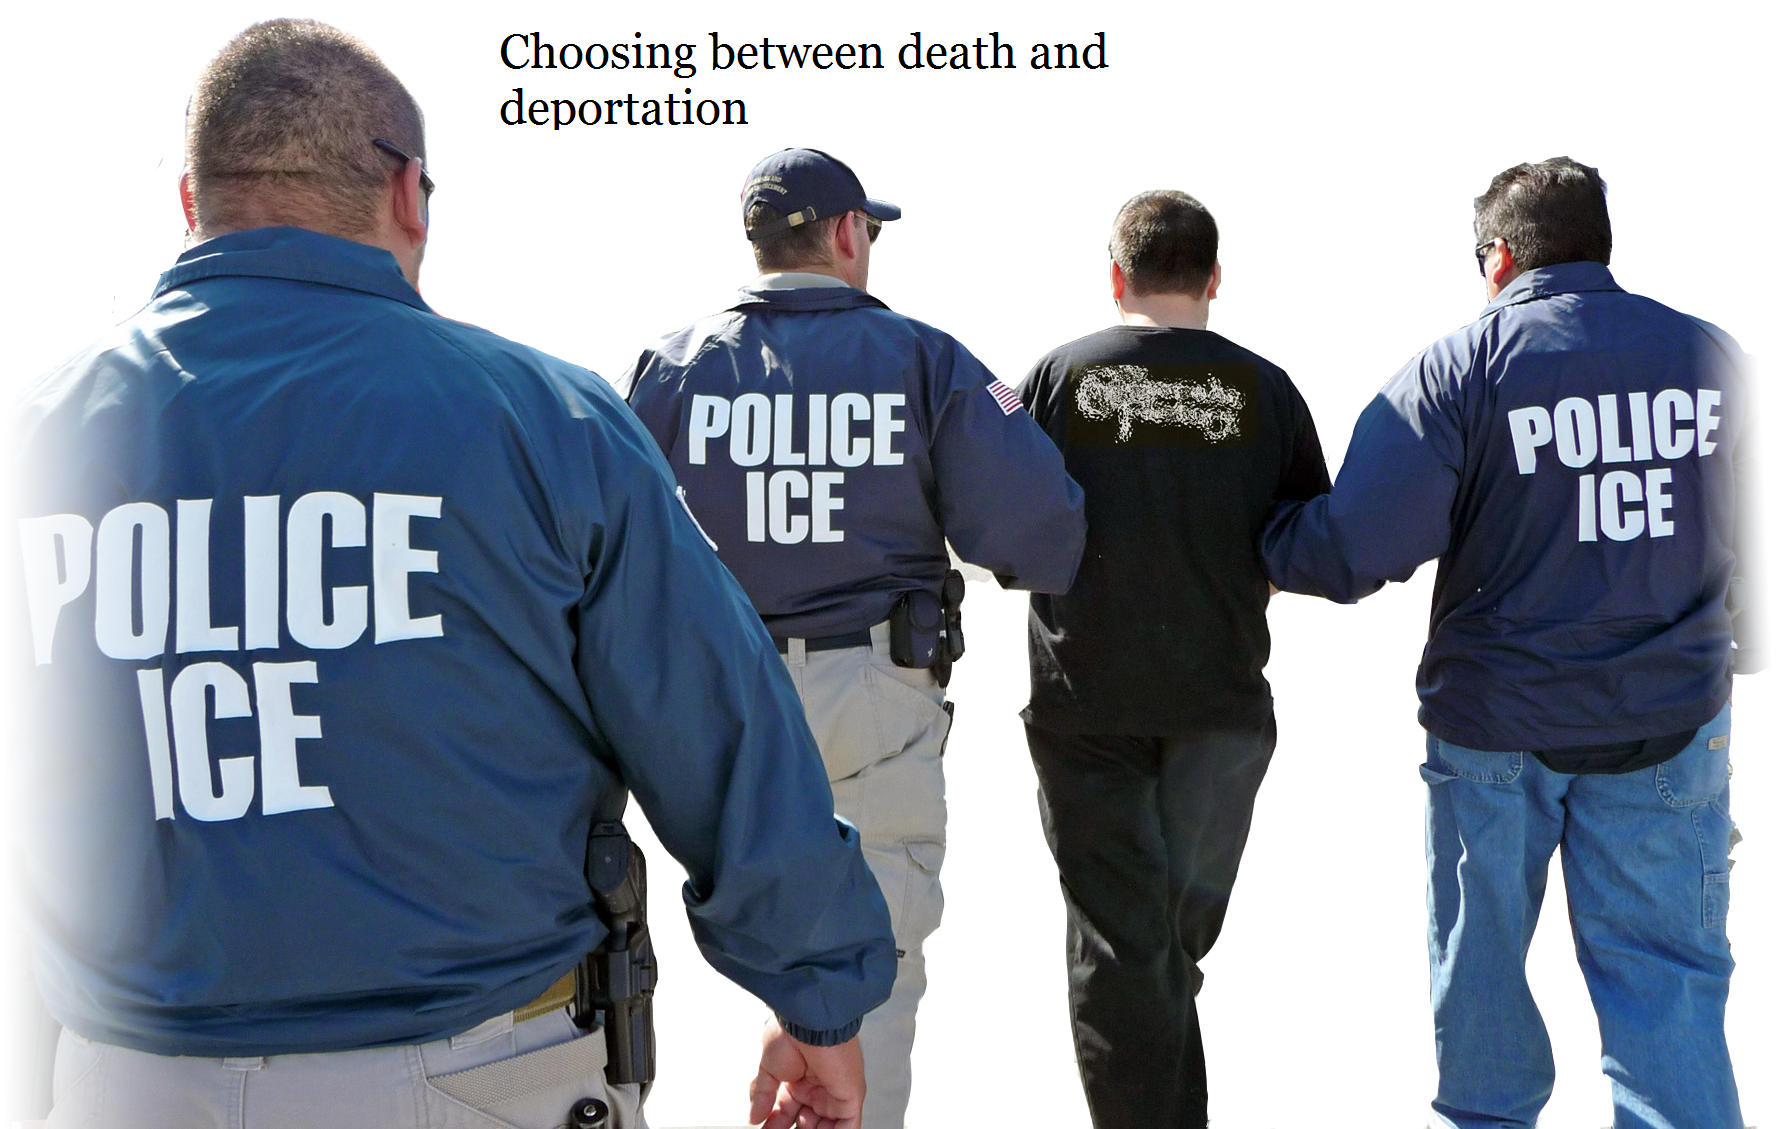 Undocumented Immigrants - Choosing between death and deportation